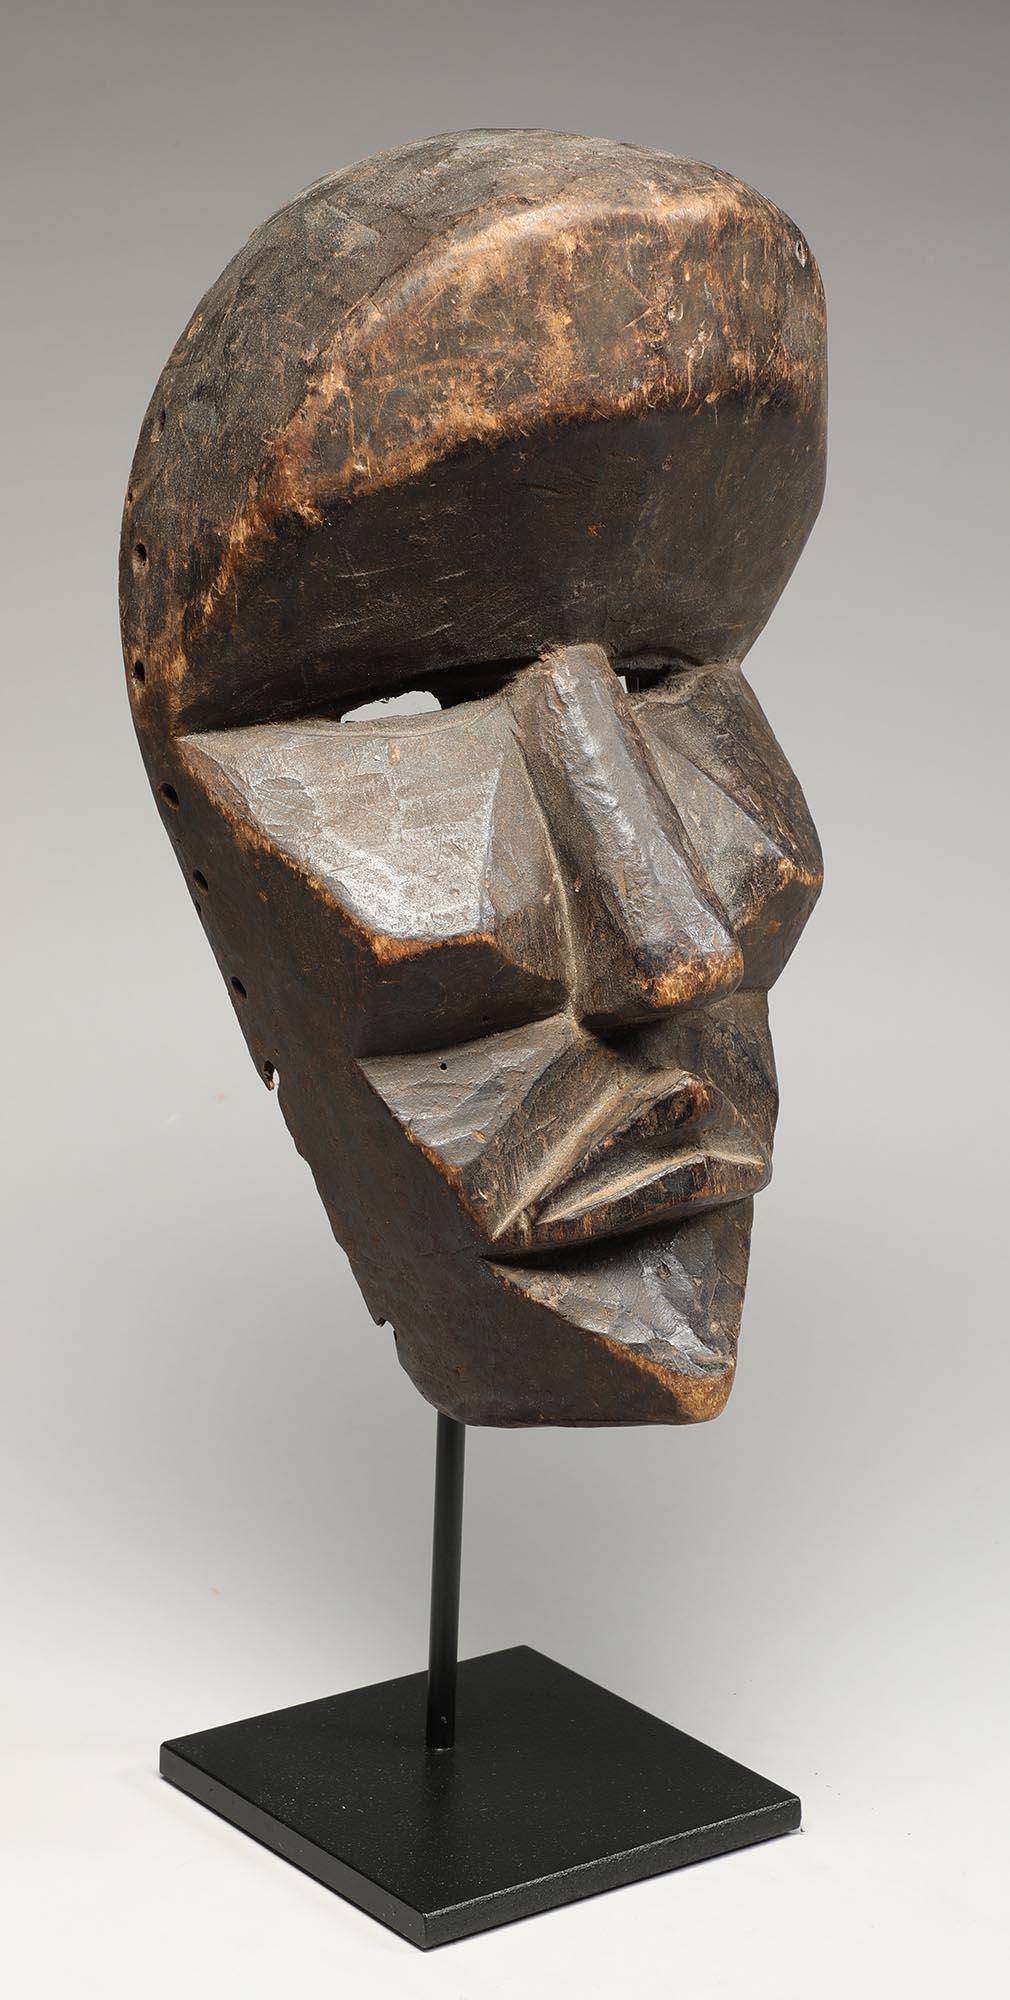 Hand-Carved Very Large Strong Expressive Cubist Dan Mask Early 20th Century Liberia, Africa